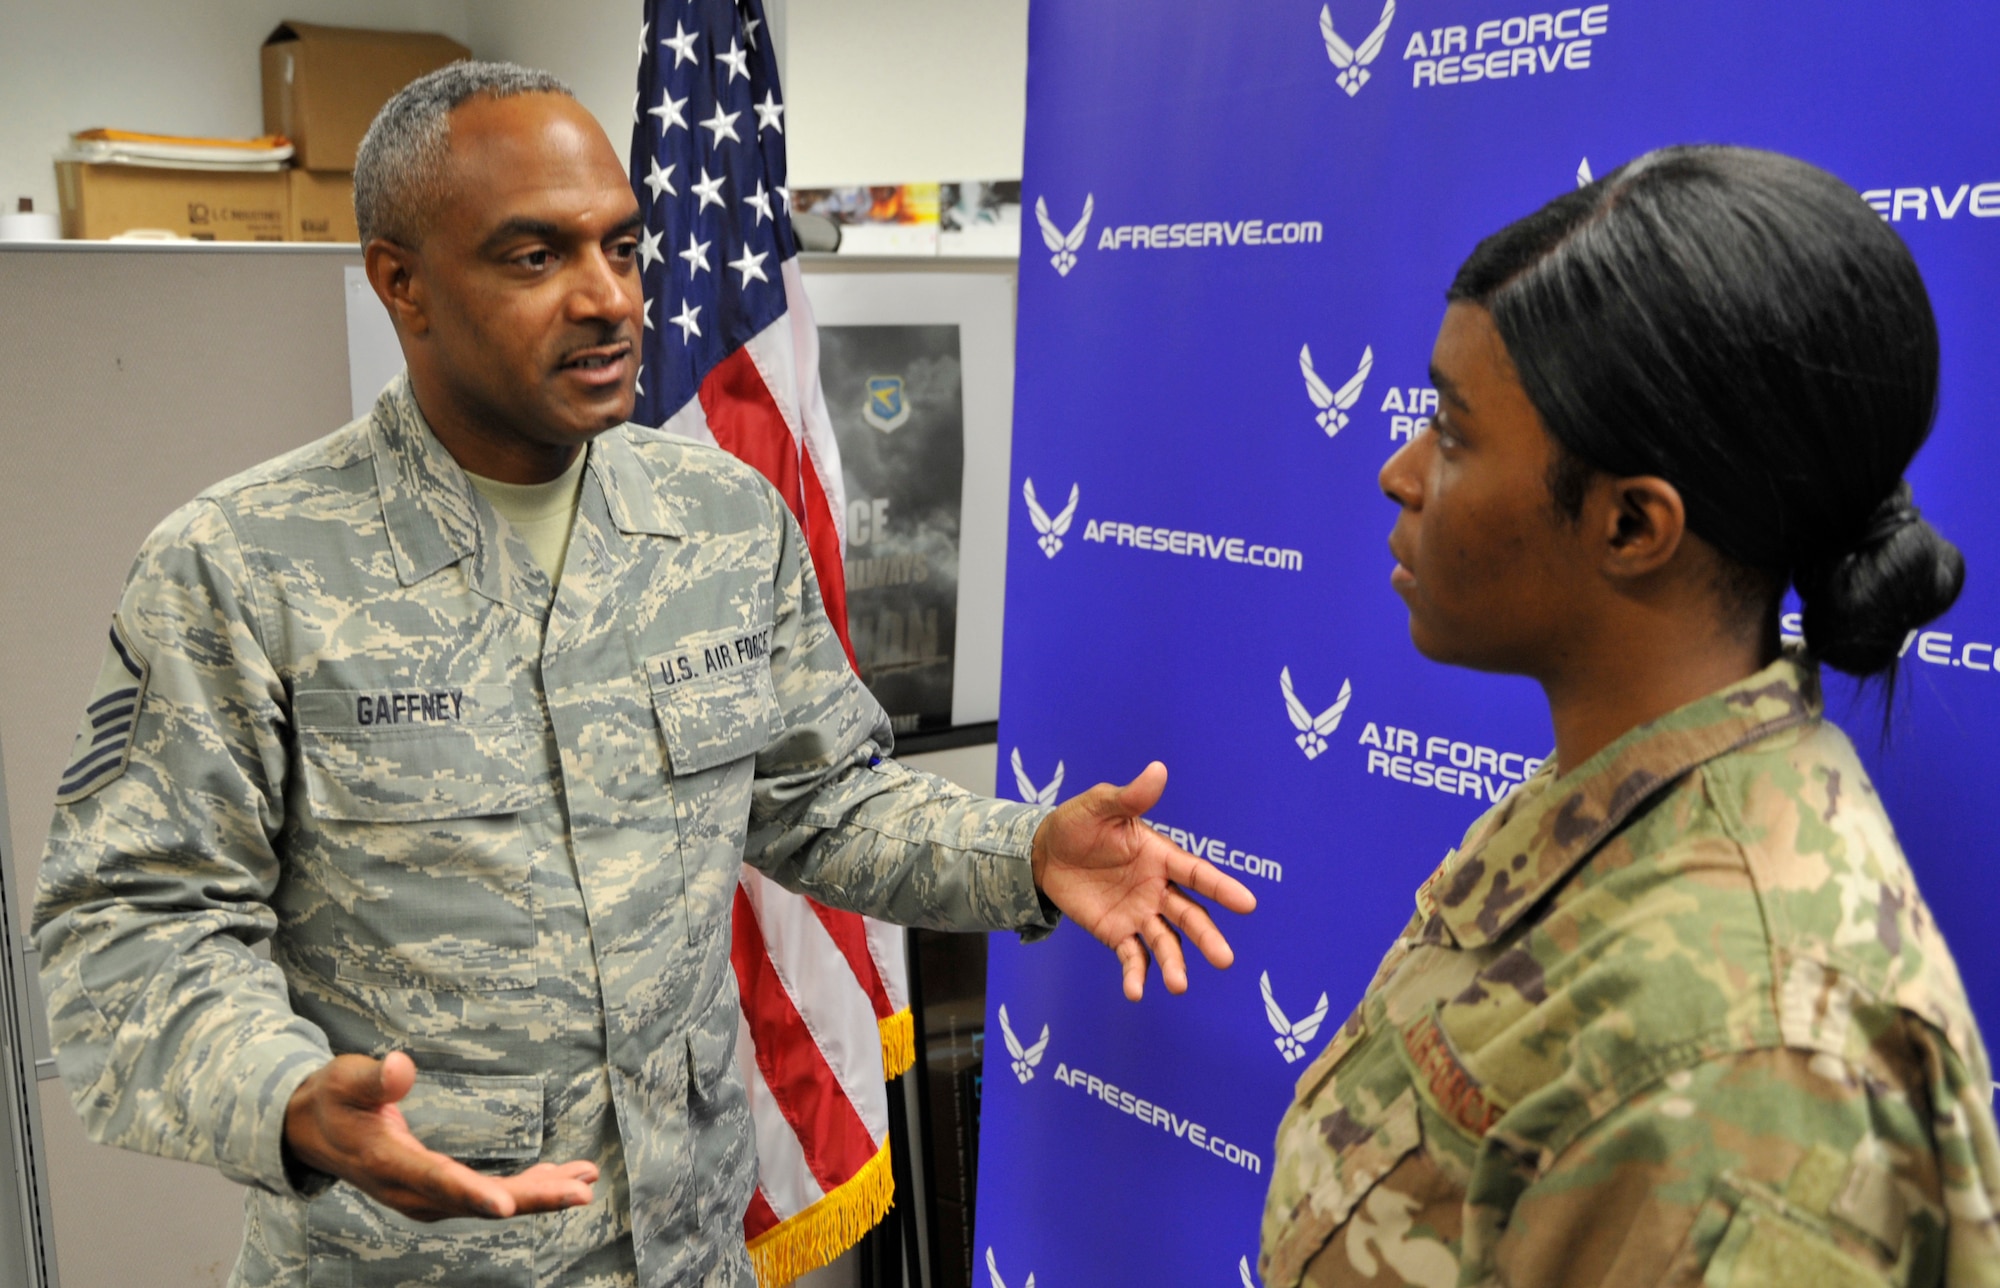 Master Sgt. David Gaffney, 403rd Wing recruiter, explains the Air Reserve Technician application process with Senior Airman Andrea Bradley, 403rd Logistics Readiness Squadron decentralized material support supply technician, during the Unit Training Assembly at Keesler Air Force Base, Biloxi, Mississippi, Aug. 3, 2019. Gaffney assists service members applying for full time ART positions within the 403rd Wing. (U.S. Air Force photo by Tech. Sgt. Michael Farrar)